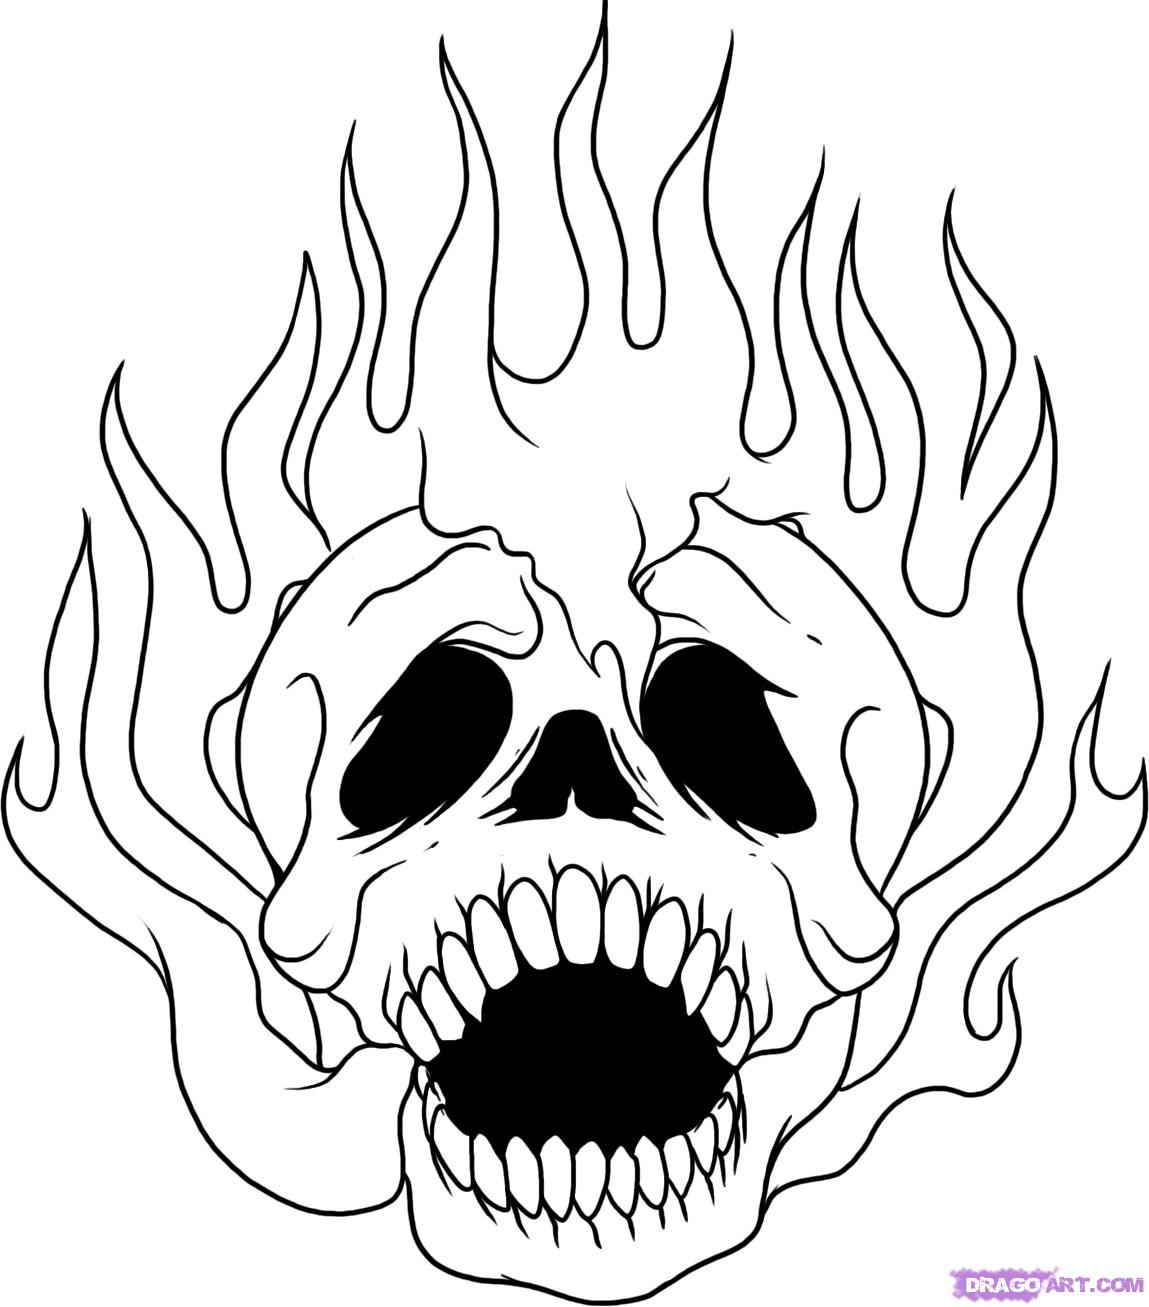 Cool Simple Drawings Of Skulls Pictures - Best HQ images | Best hq 